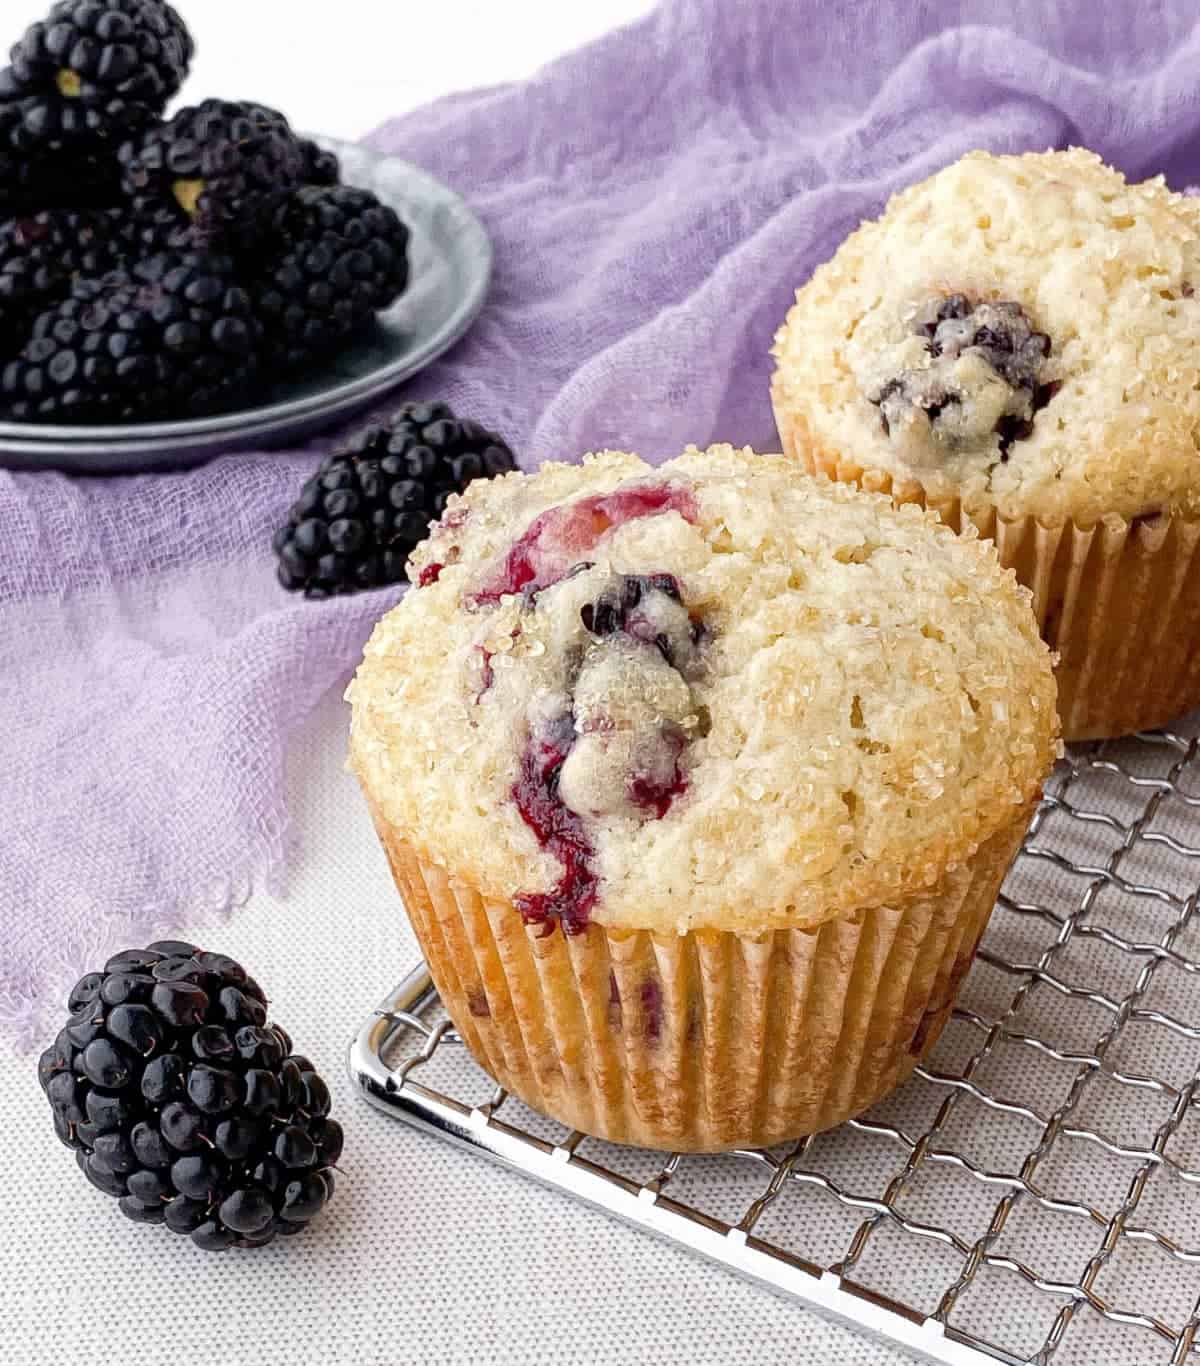 Closeup of Blackberry Buttermilk Muffin with fresh blackberries nearby.